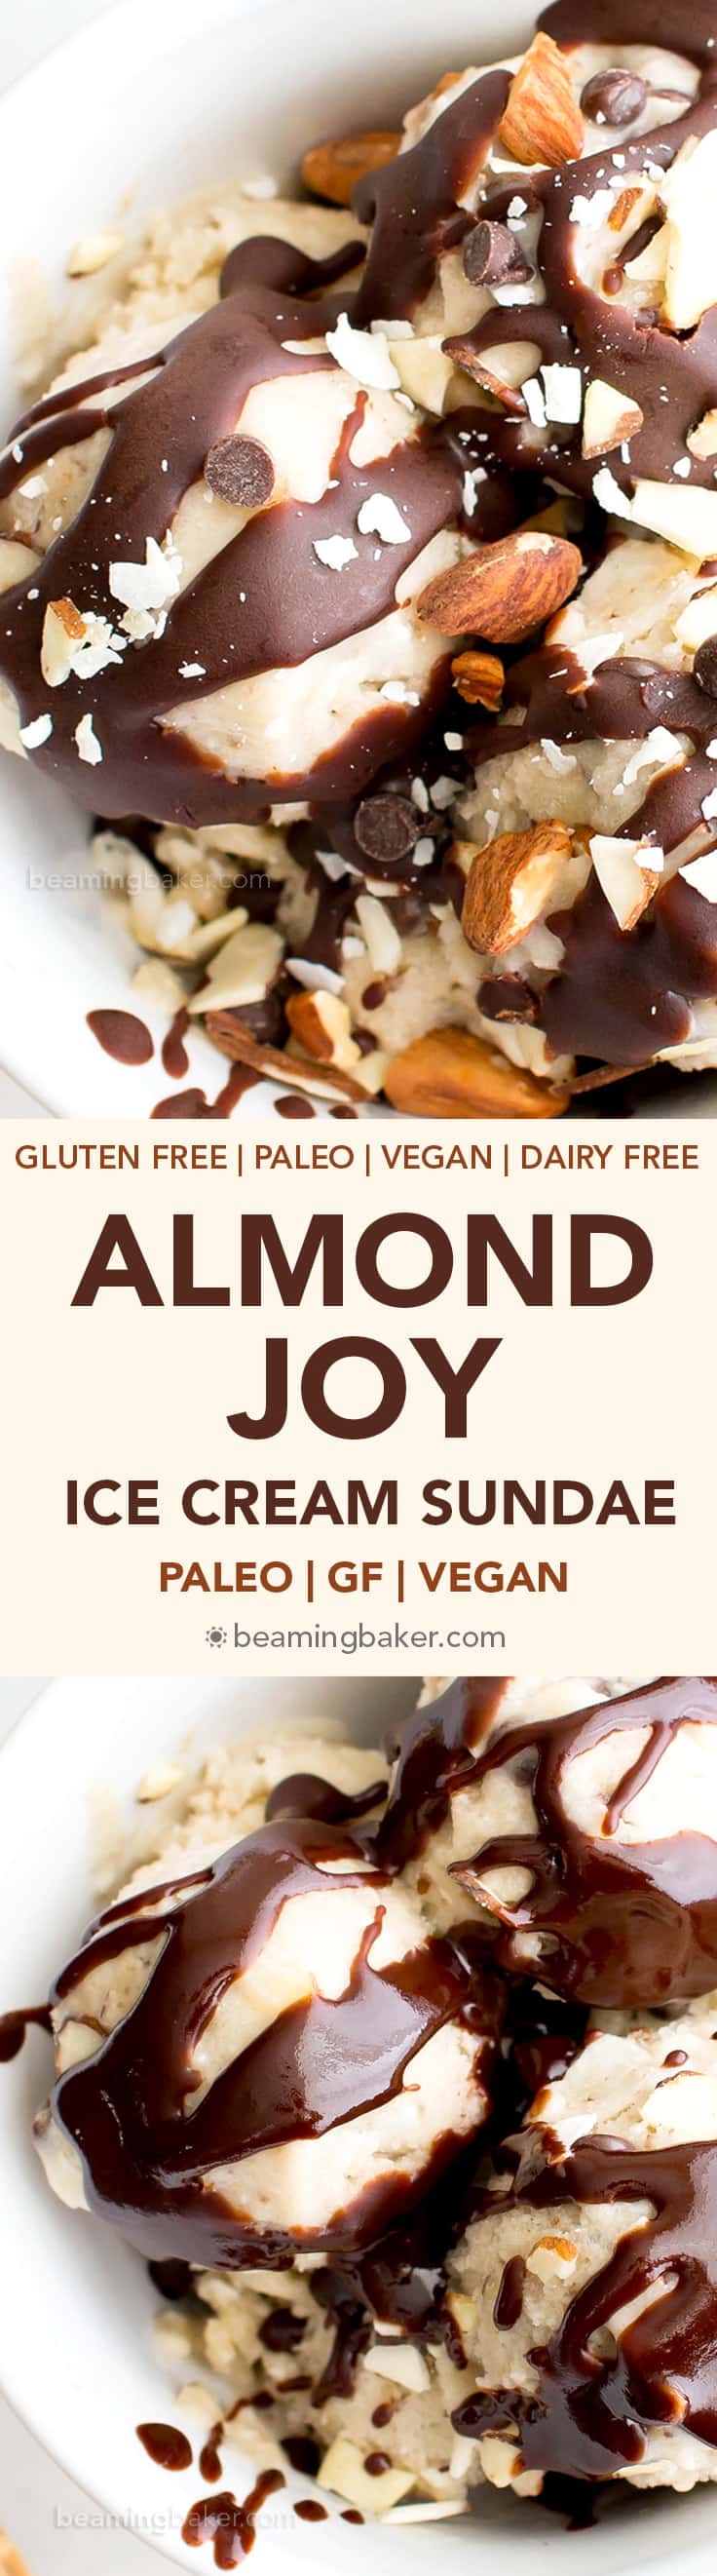 Dairy-Free Almond Joy Ice Cream Sundae (V, DF, Paleo): the perfect frozen, allergy-friendly treat to satisfy your Almond Joy cravings and cool you down this summer! #Vegan #DairyFree #Paleo #GlutenFree | BeamingBaker.com